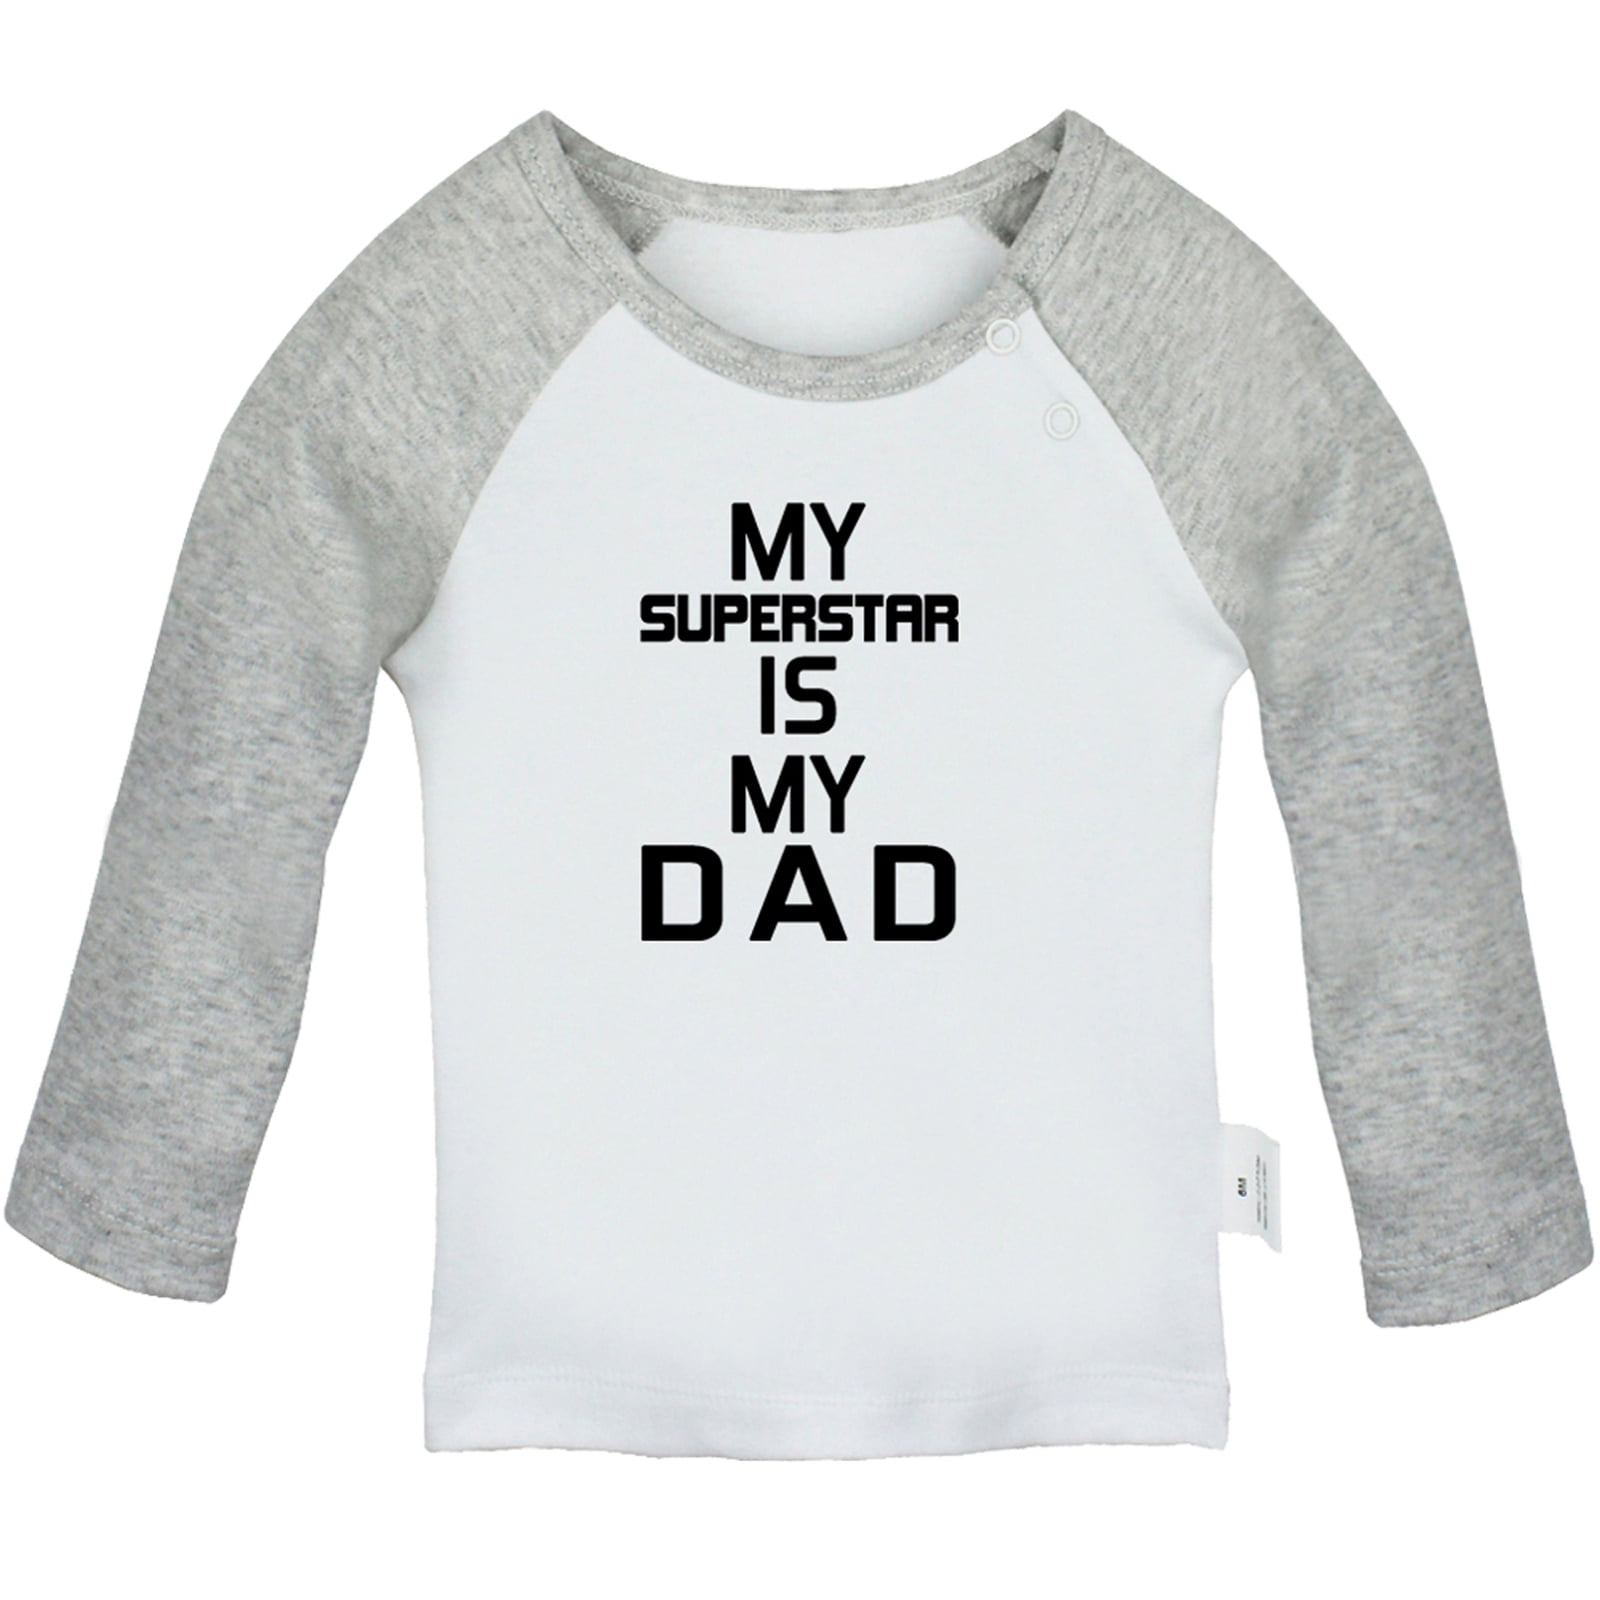 My Superstar Is My Dad Funny T shirt For Baby, Newborn Babies T-shirts,  Infant Tops, 0-24M Kids Graphic Tees Clothing (Long Pink Raglan T-shirt,  0-6 Months) 